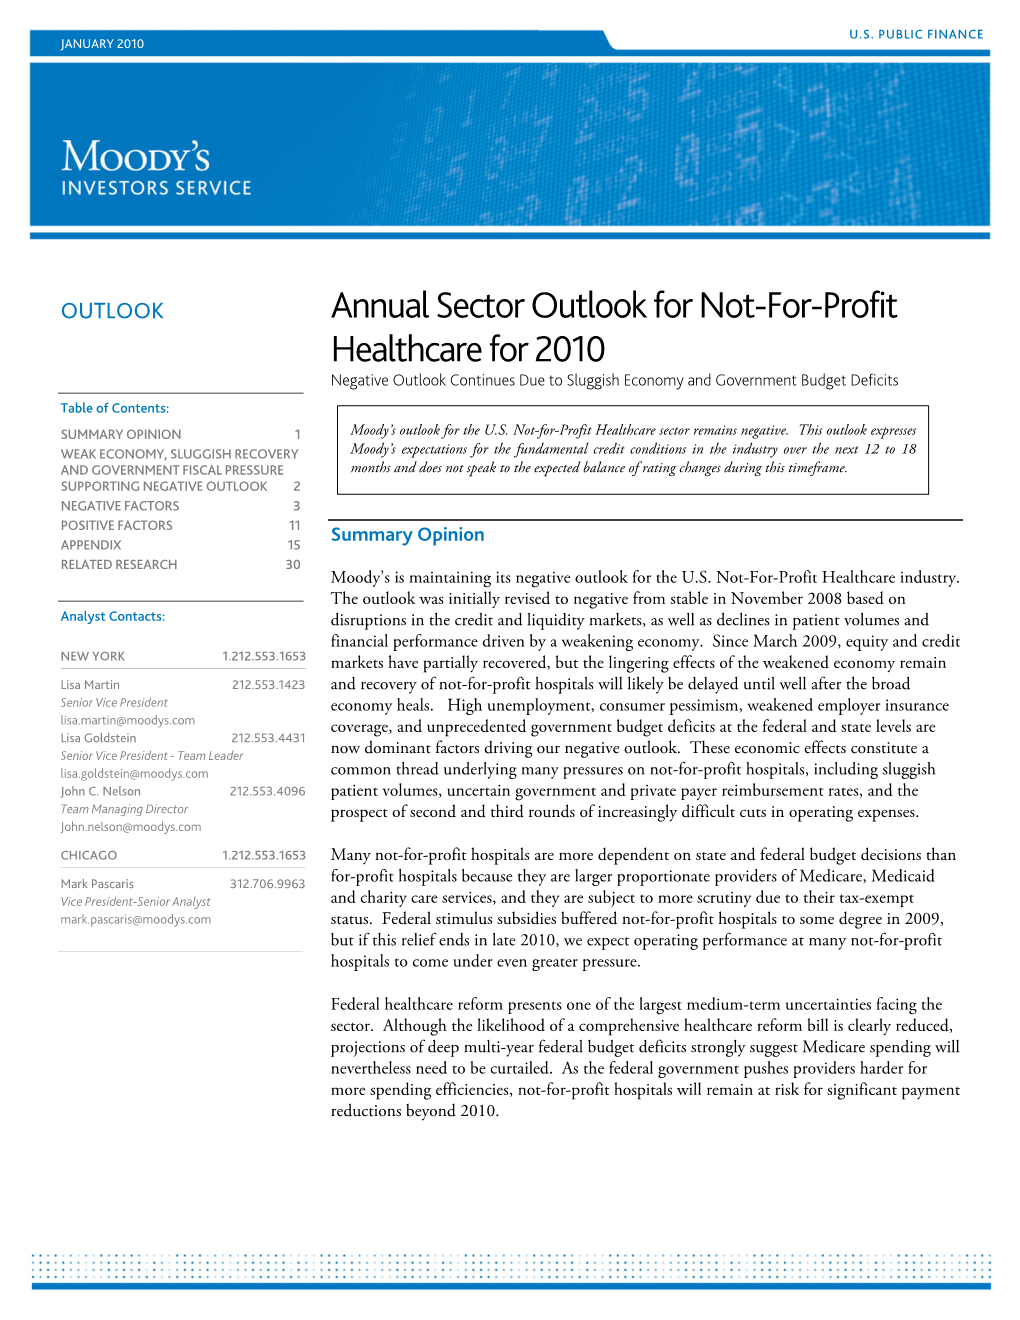 Annual Sector Outlook for Not-For-Profit Healthcare for 2010